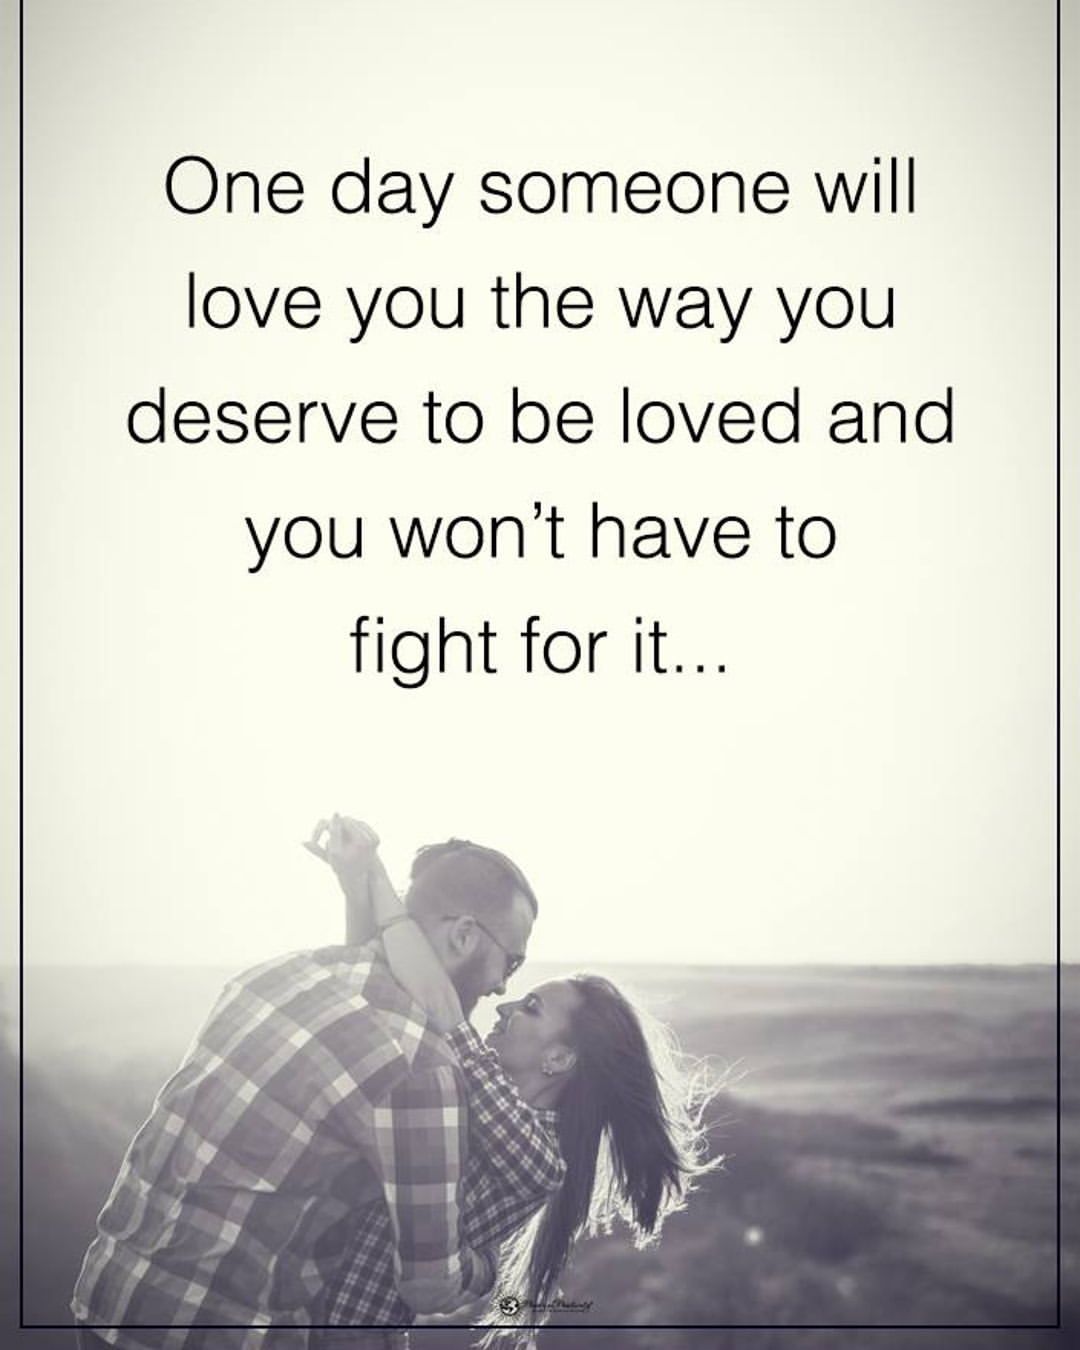 One day someone will love you the way you deserve to be loved and you won't have to fight for it...